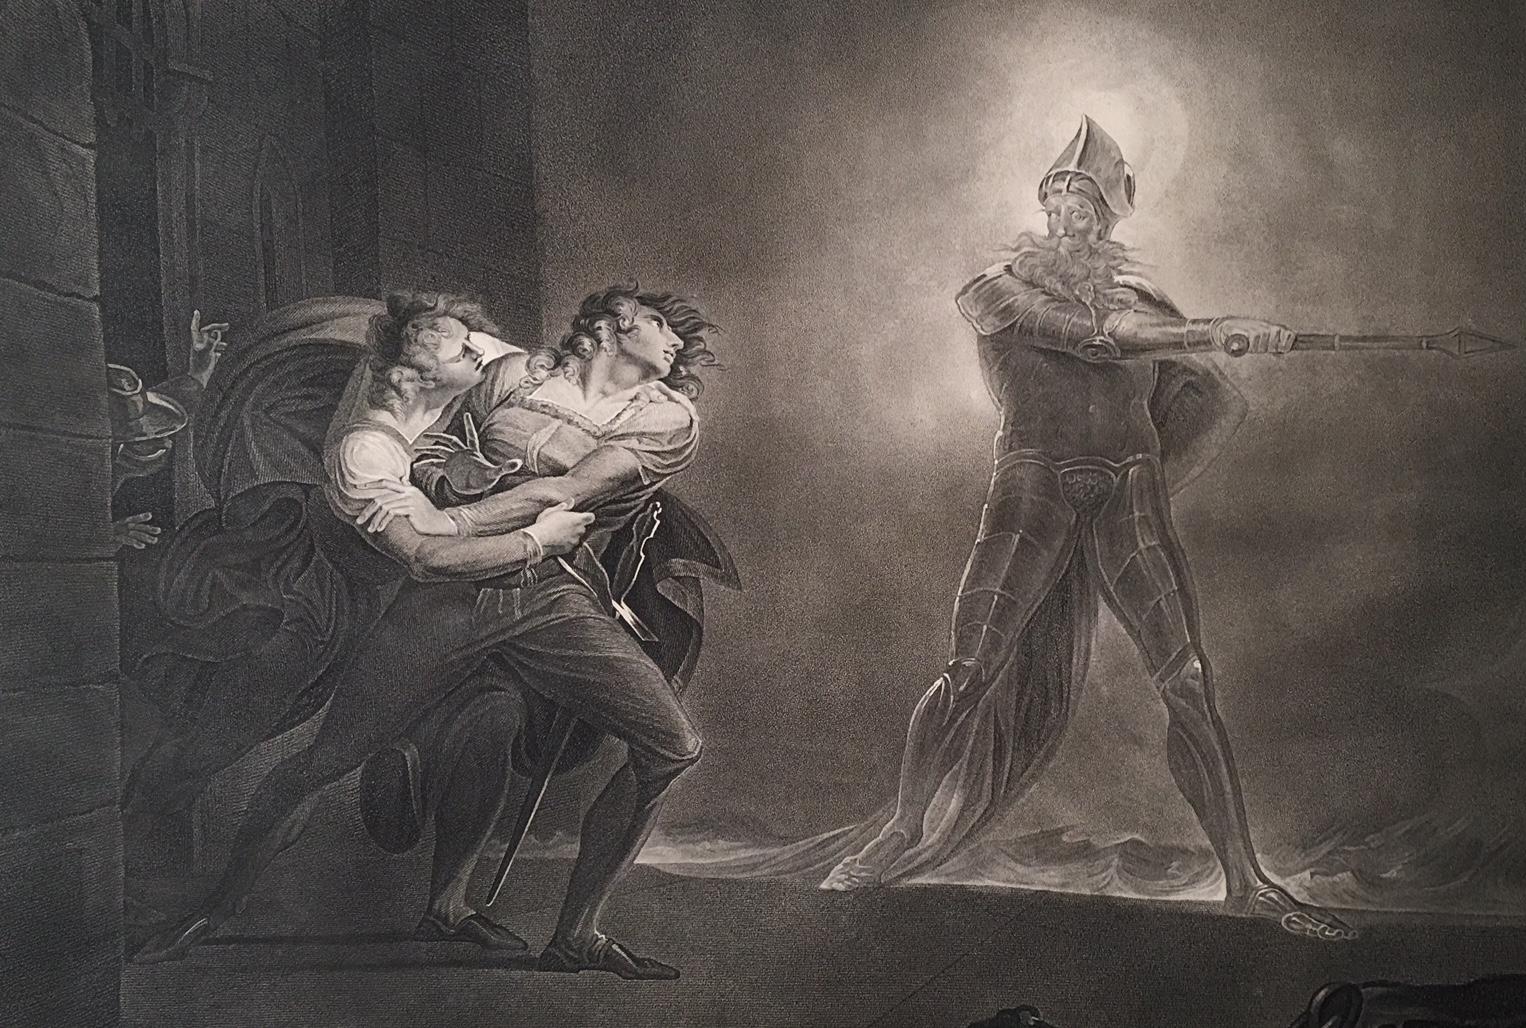 Henry Fuseli Figurative Print - Hamlet, Act I, Scene IV: Hamlet, Horatio, Marcellus, and the Ghost